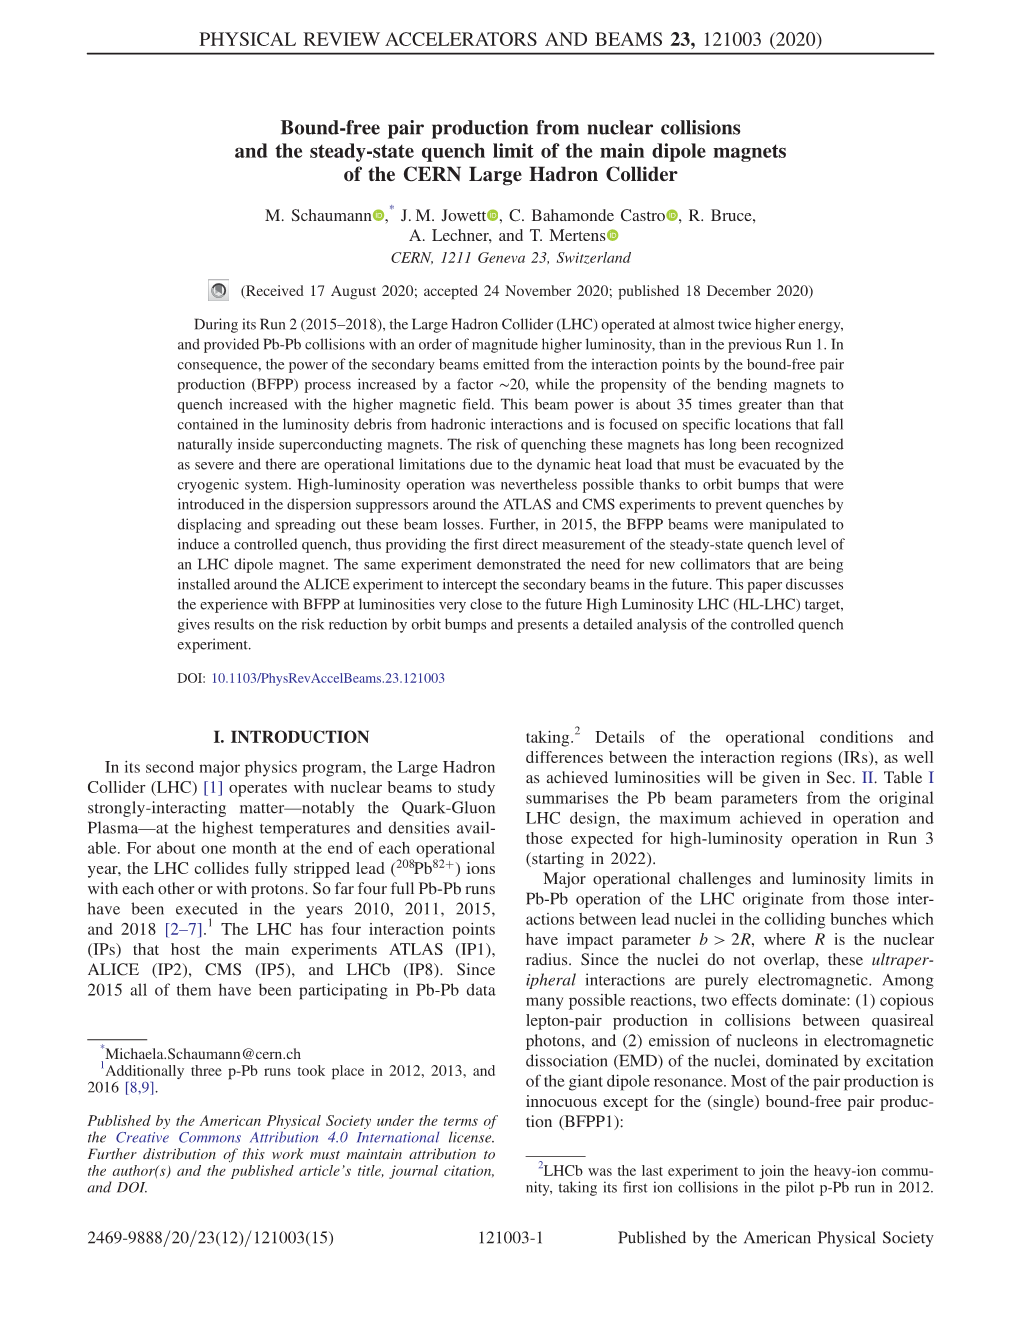 Bound-Free Pair Production from Nuclear Collisions and the Steady-State Quench Limit of the Main Dipole Magnets of the CERN Large Hadron Collider